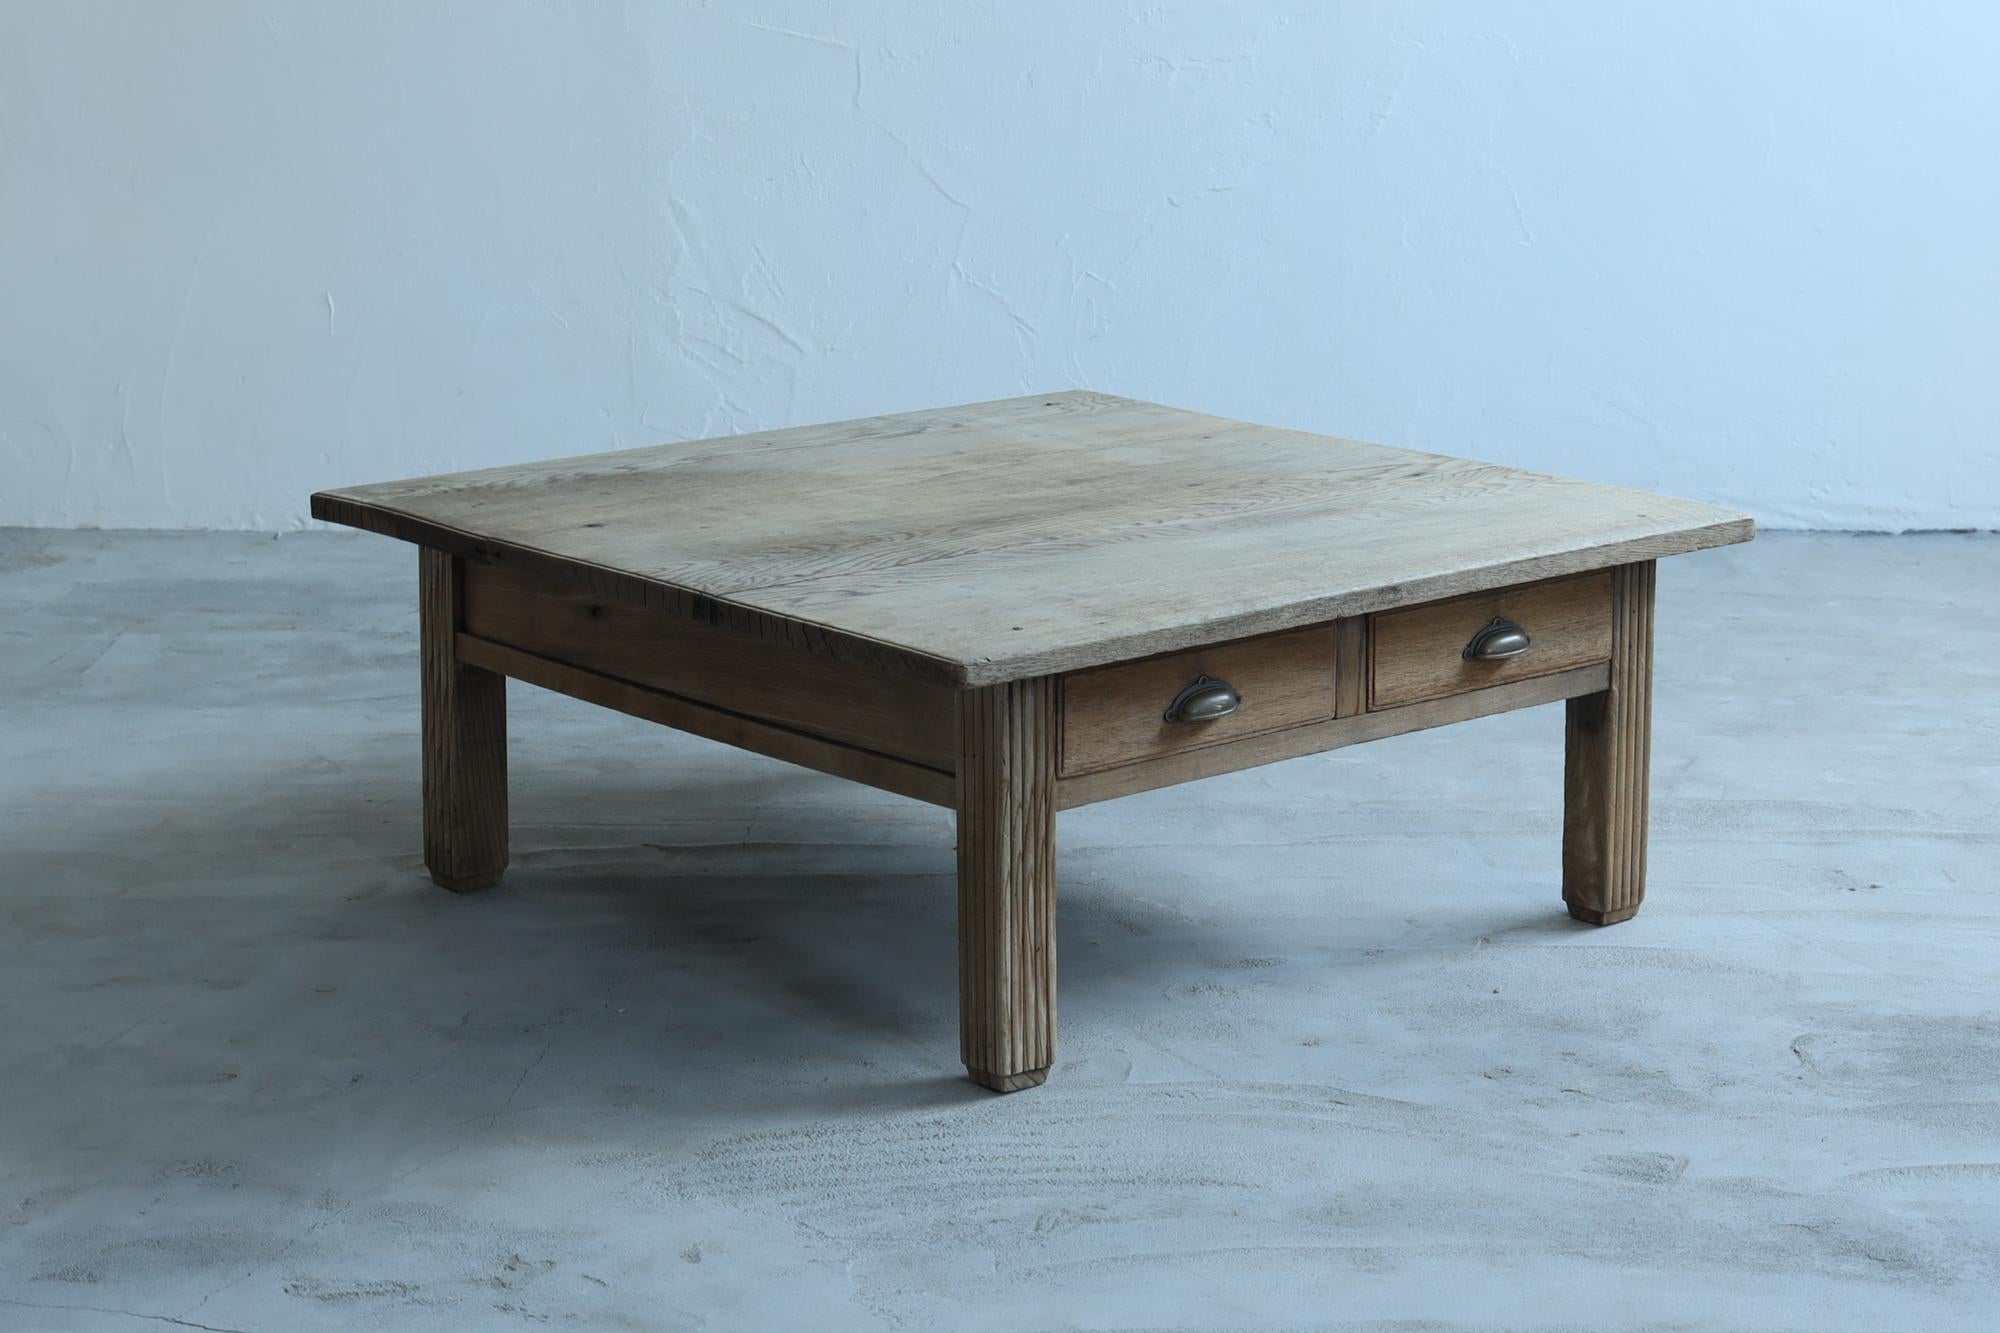 Japanese Antique Coffee Table, Desk, Wabi-Sabi, Early 20th Century For Sale 12